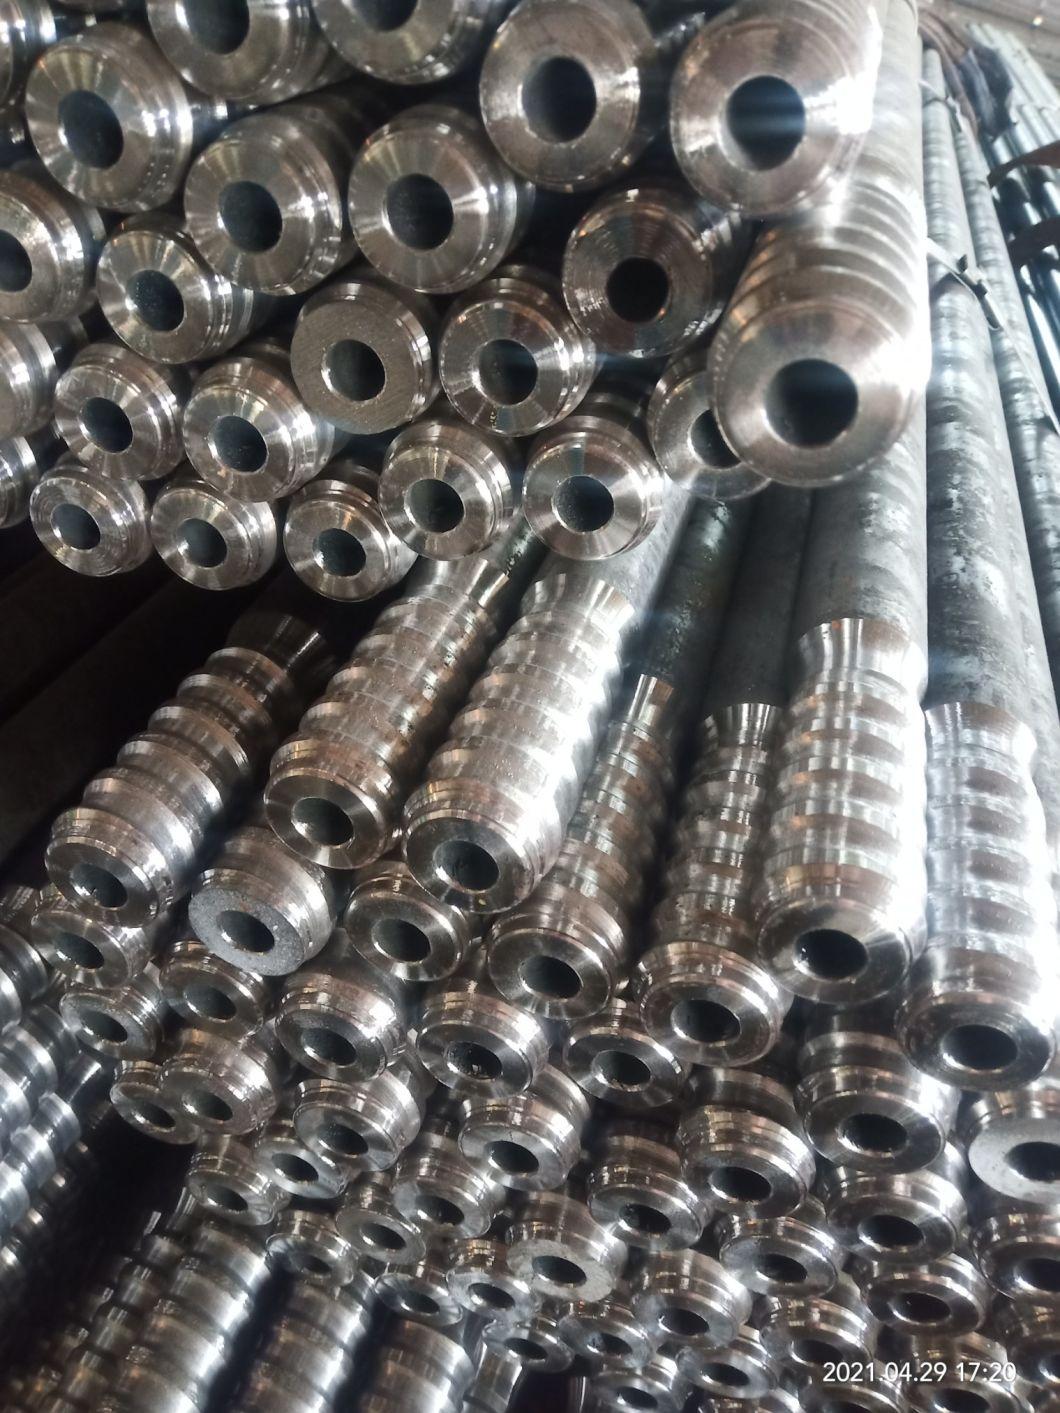 32mm Blast Furnace Drill Rod Manufacturer Factory Order and Market Spot Independent Production